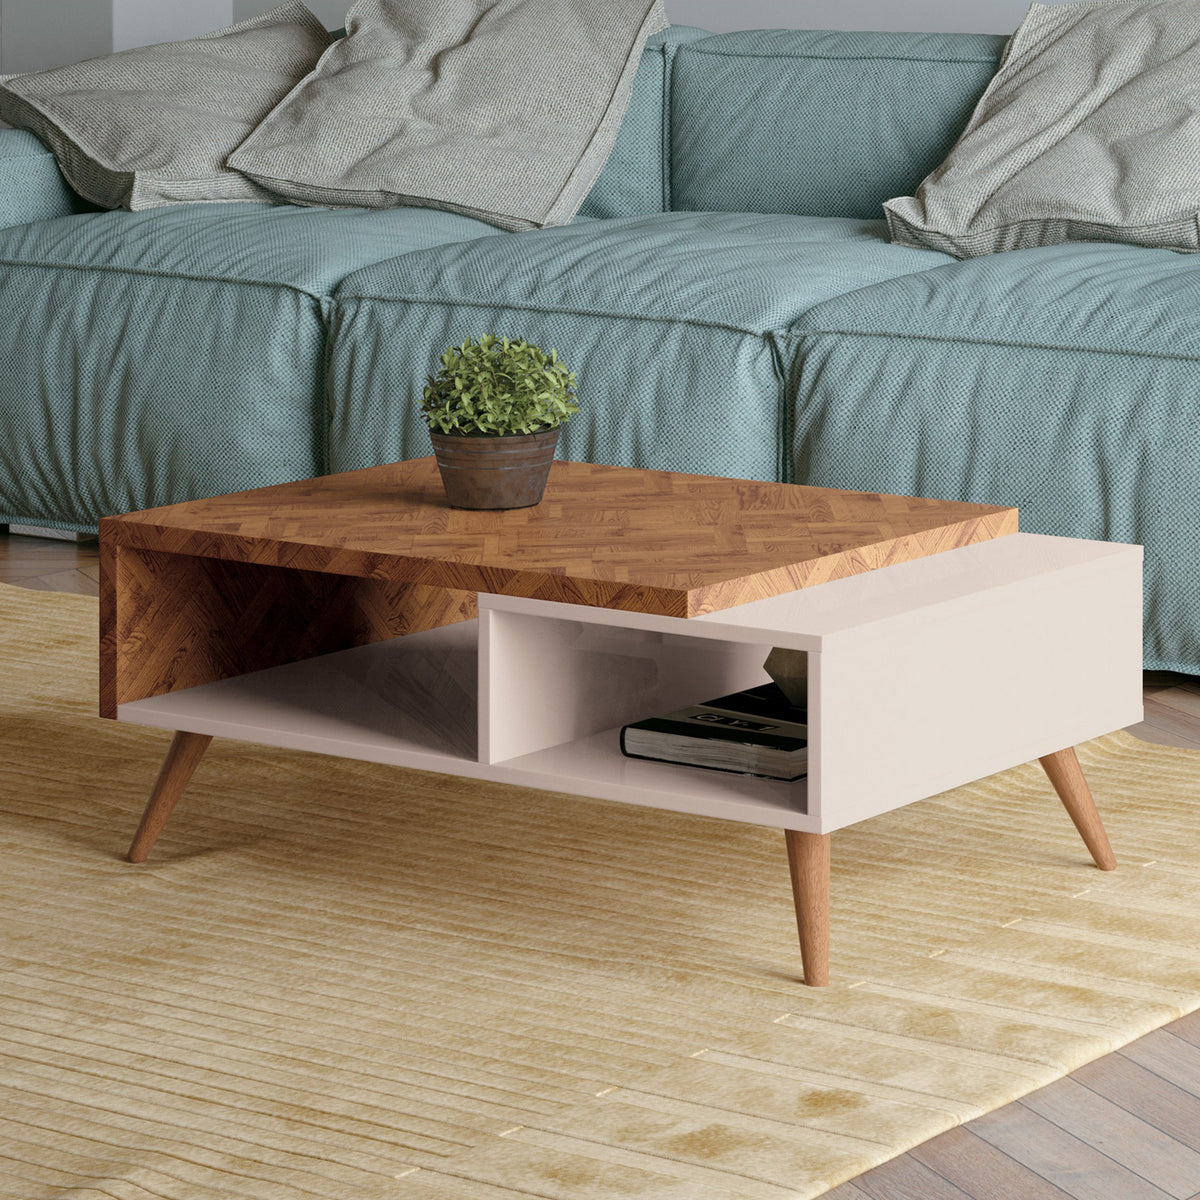 Two Tone Wooden Coffee Table with splayed legs & storage Shelf, White and Brown - UPT-225283